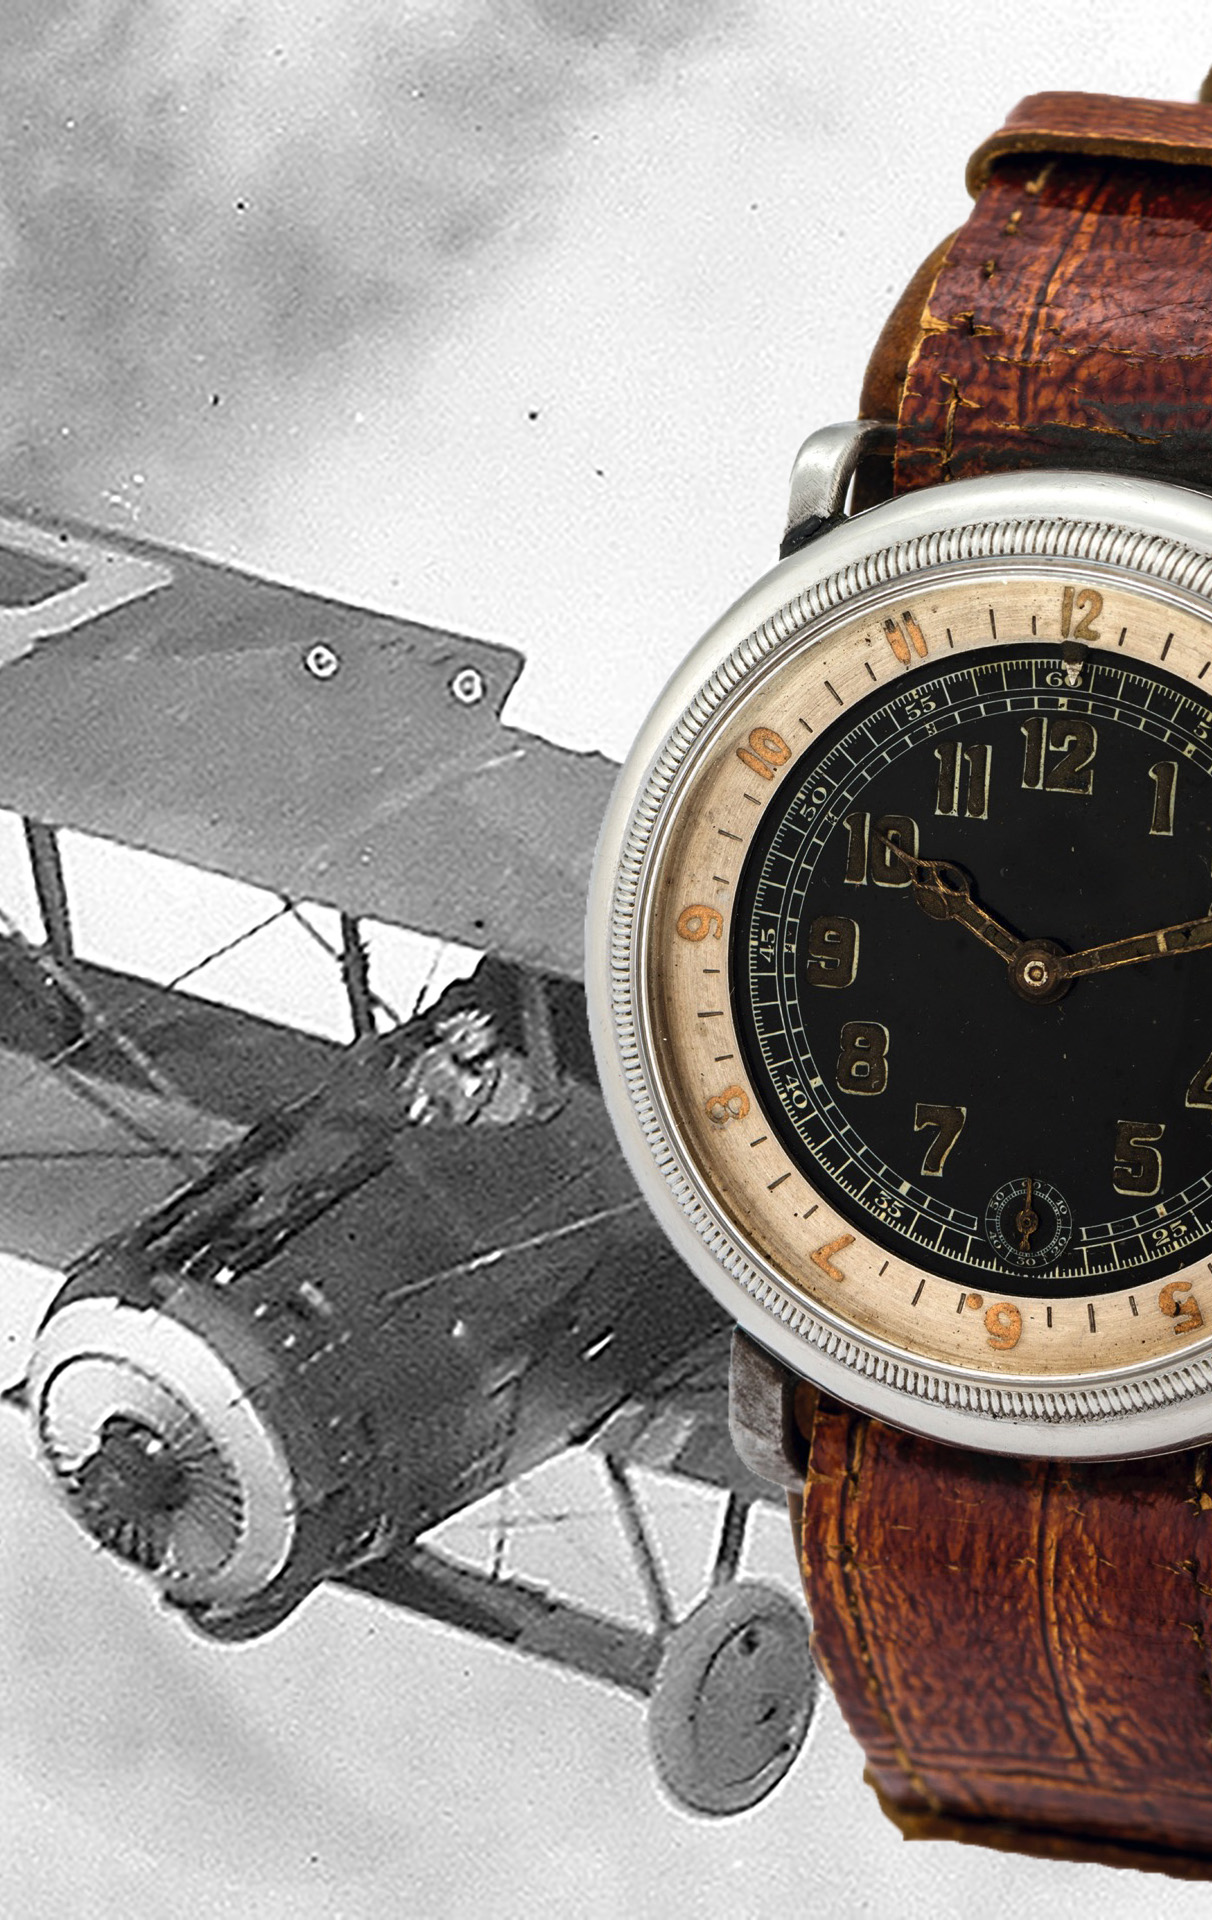 History of Pilot Watches